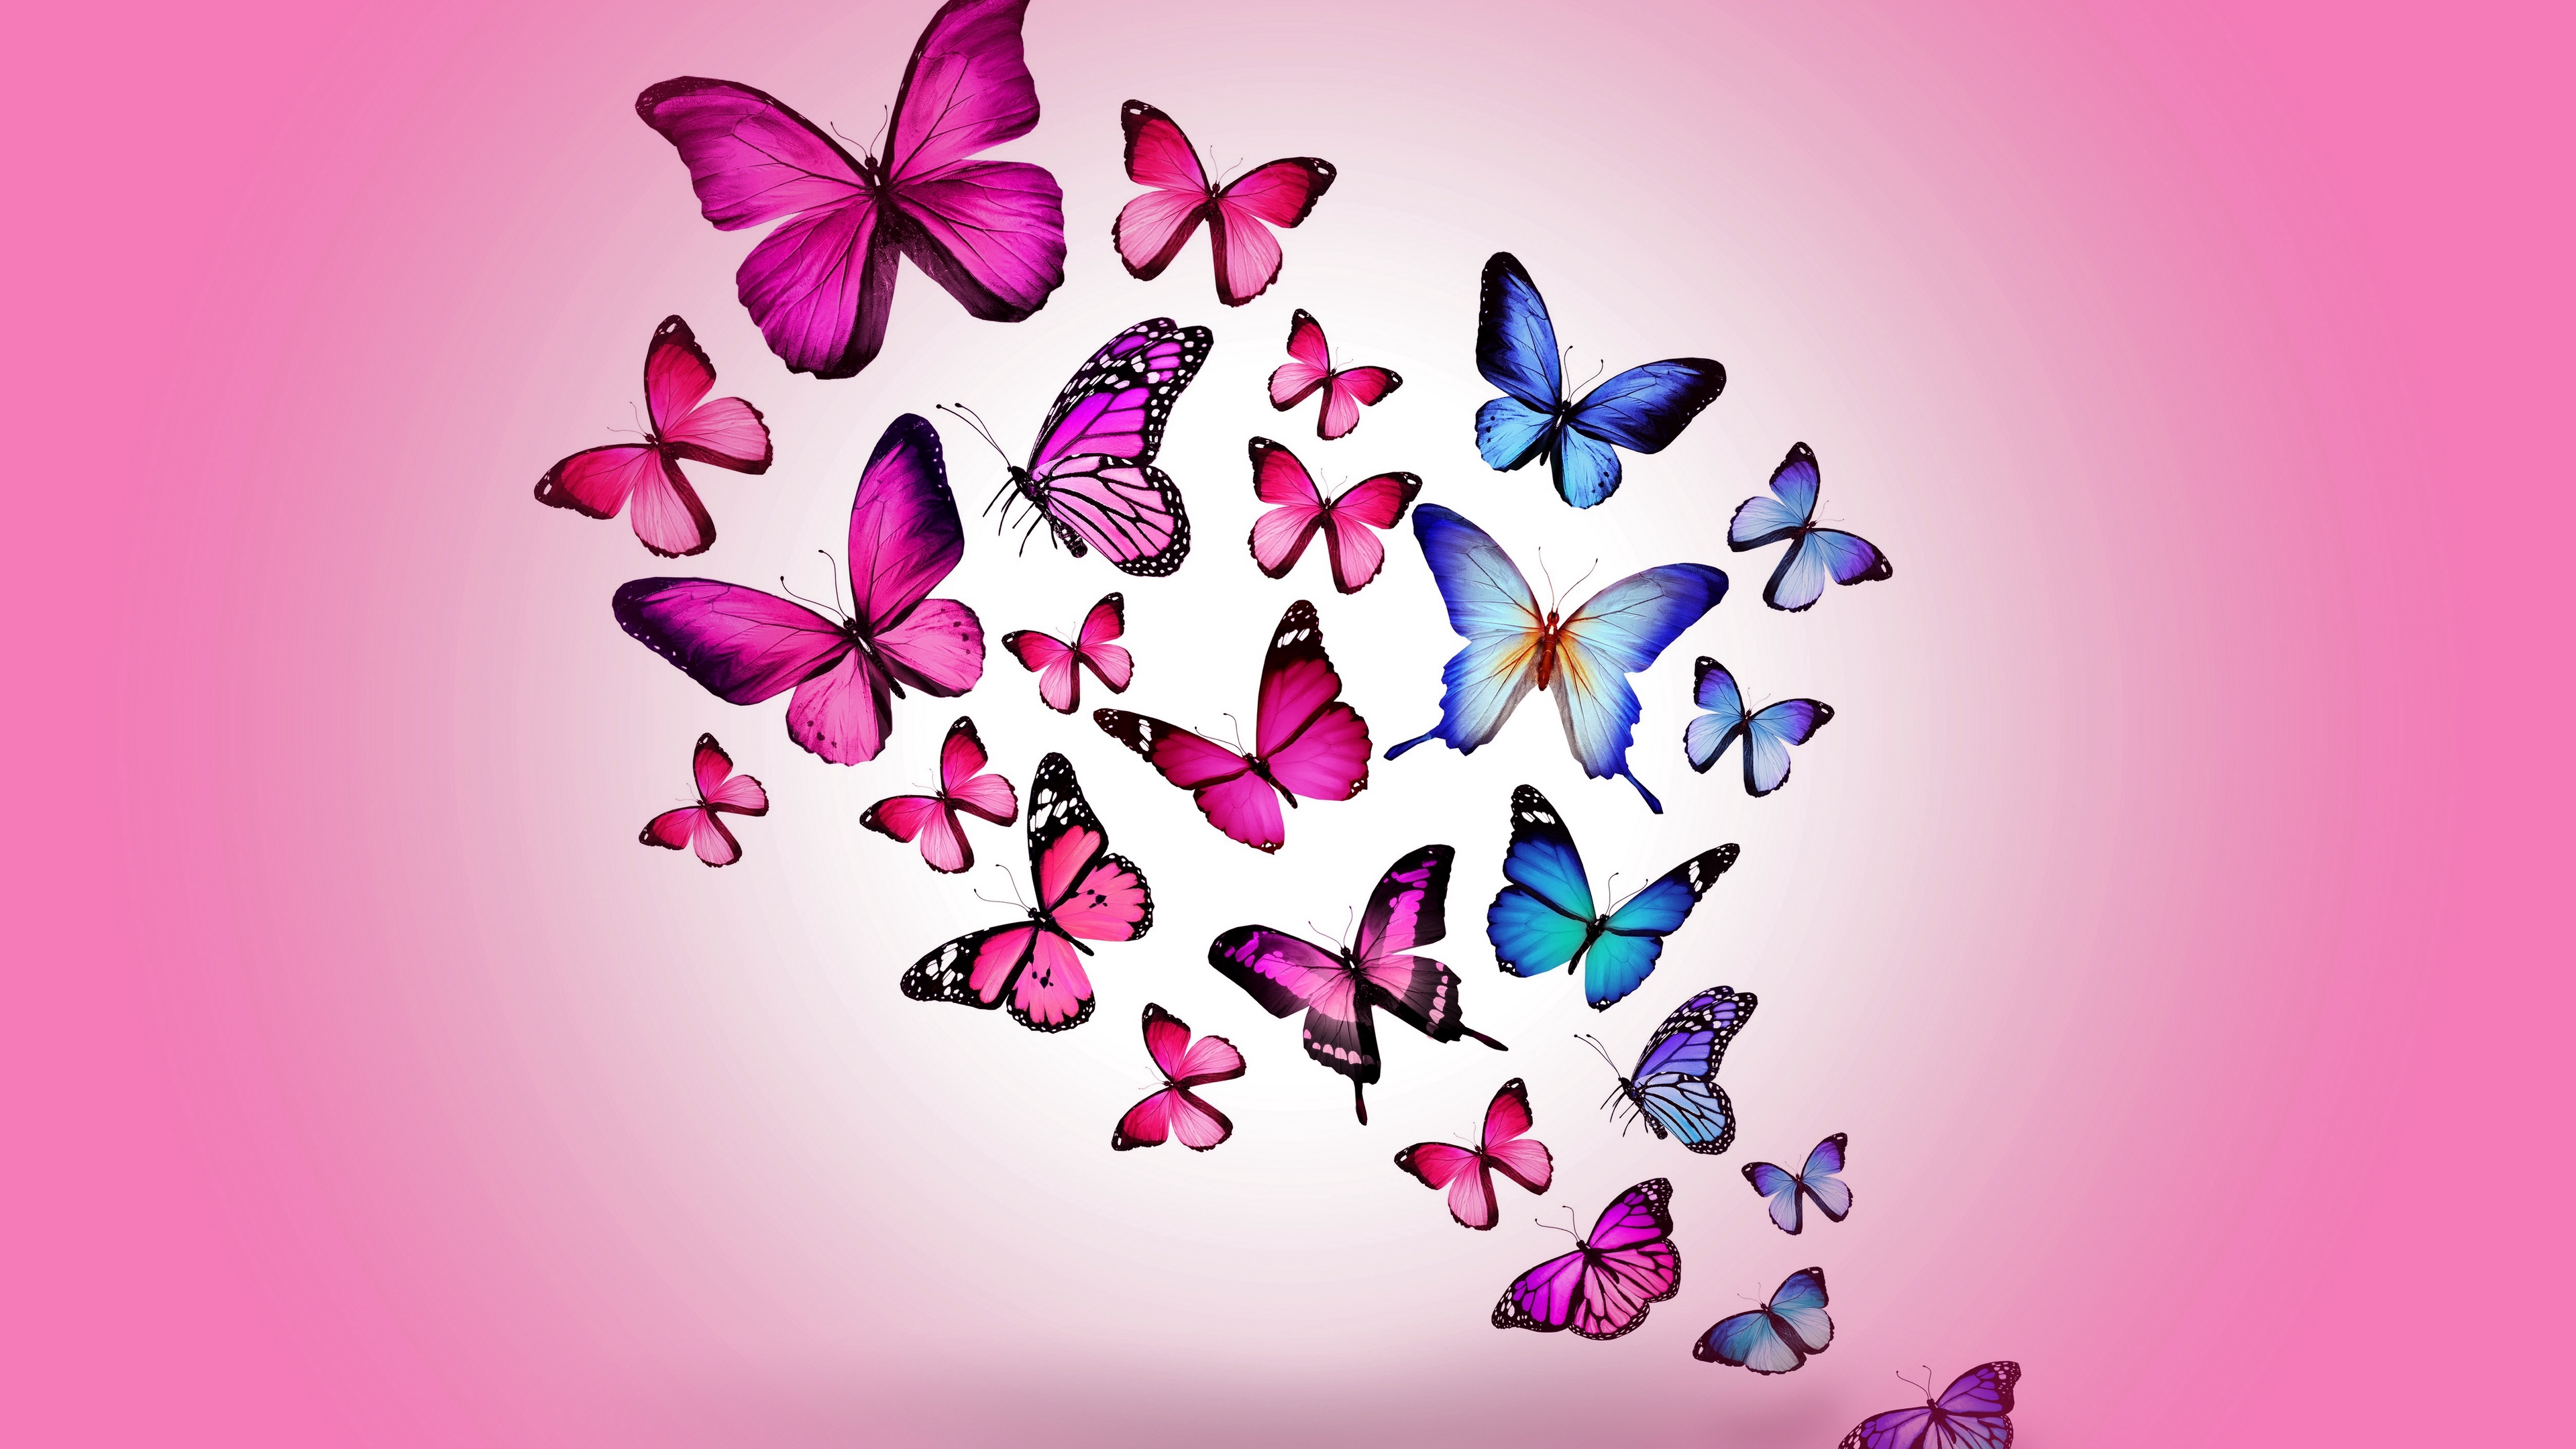 Download wallpaper 3840x2160 butterfly, drawing, flying, colorful